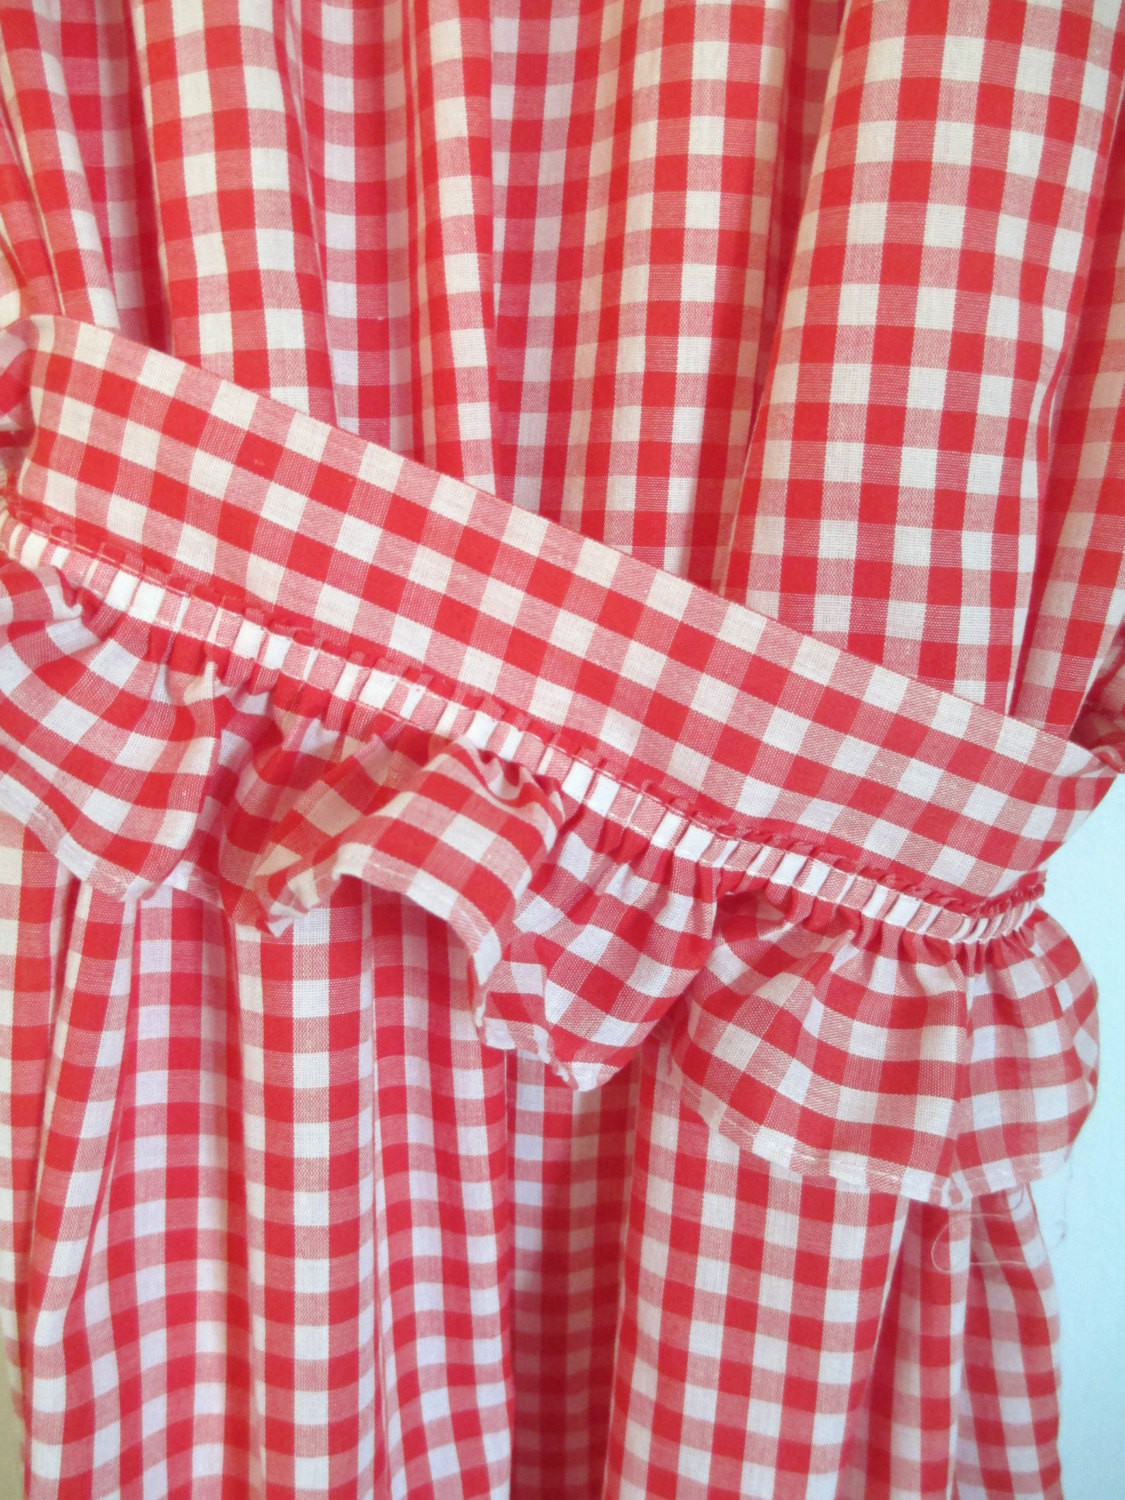 Red Checkered Kitchen Curtains
 Red White Gingham Curtains 2 panels Valance and Ruffled Tie